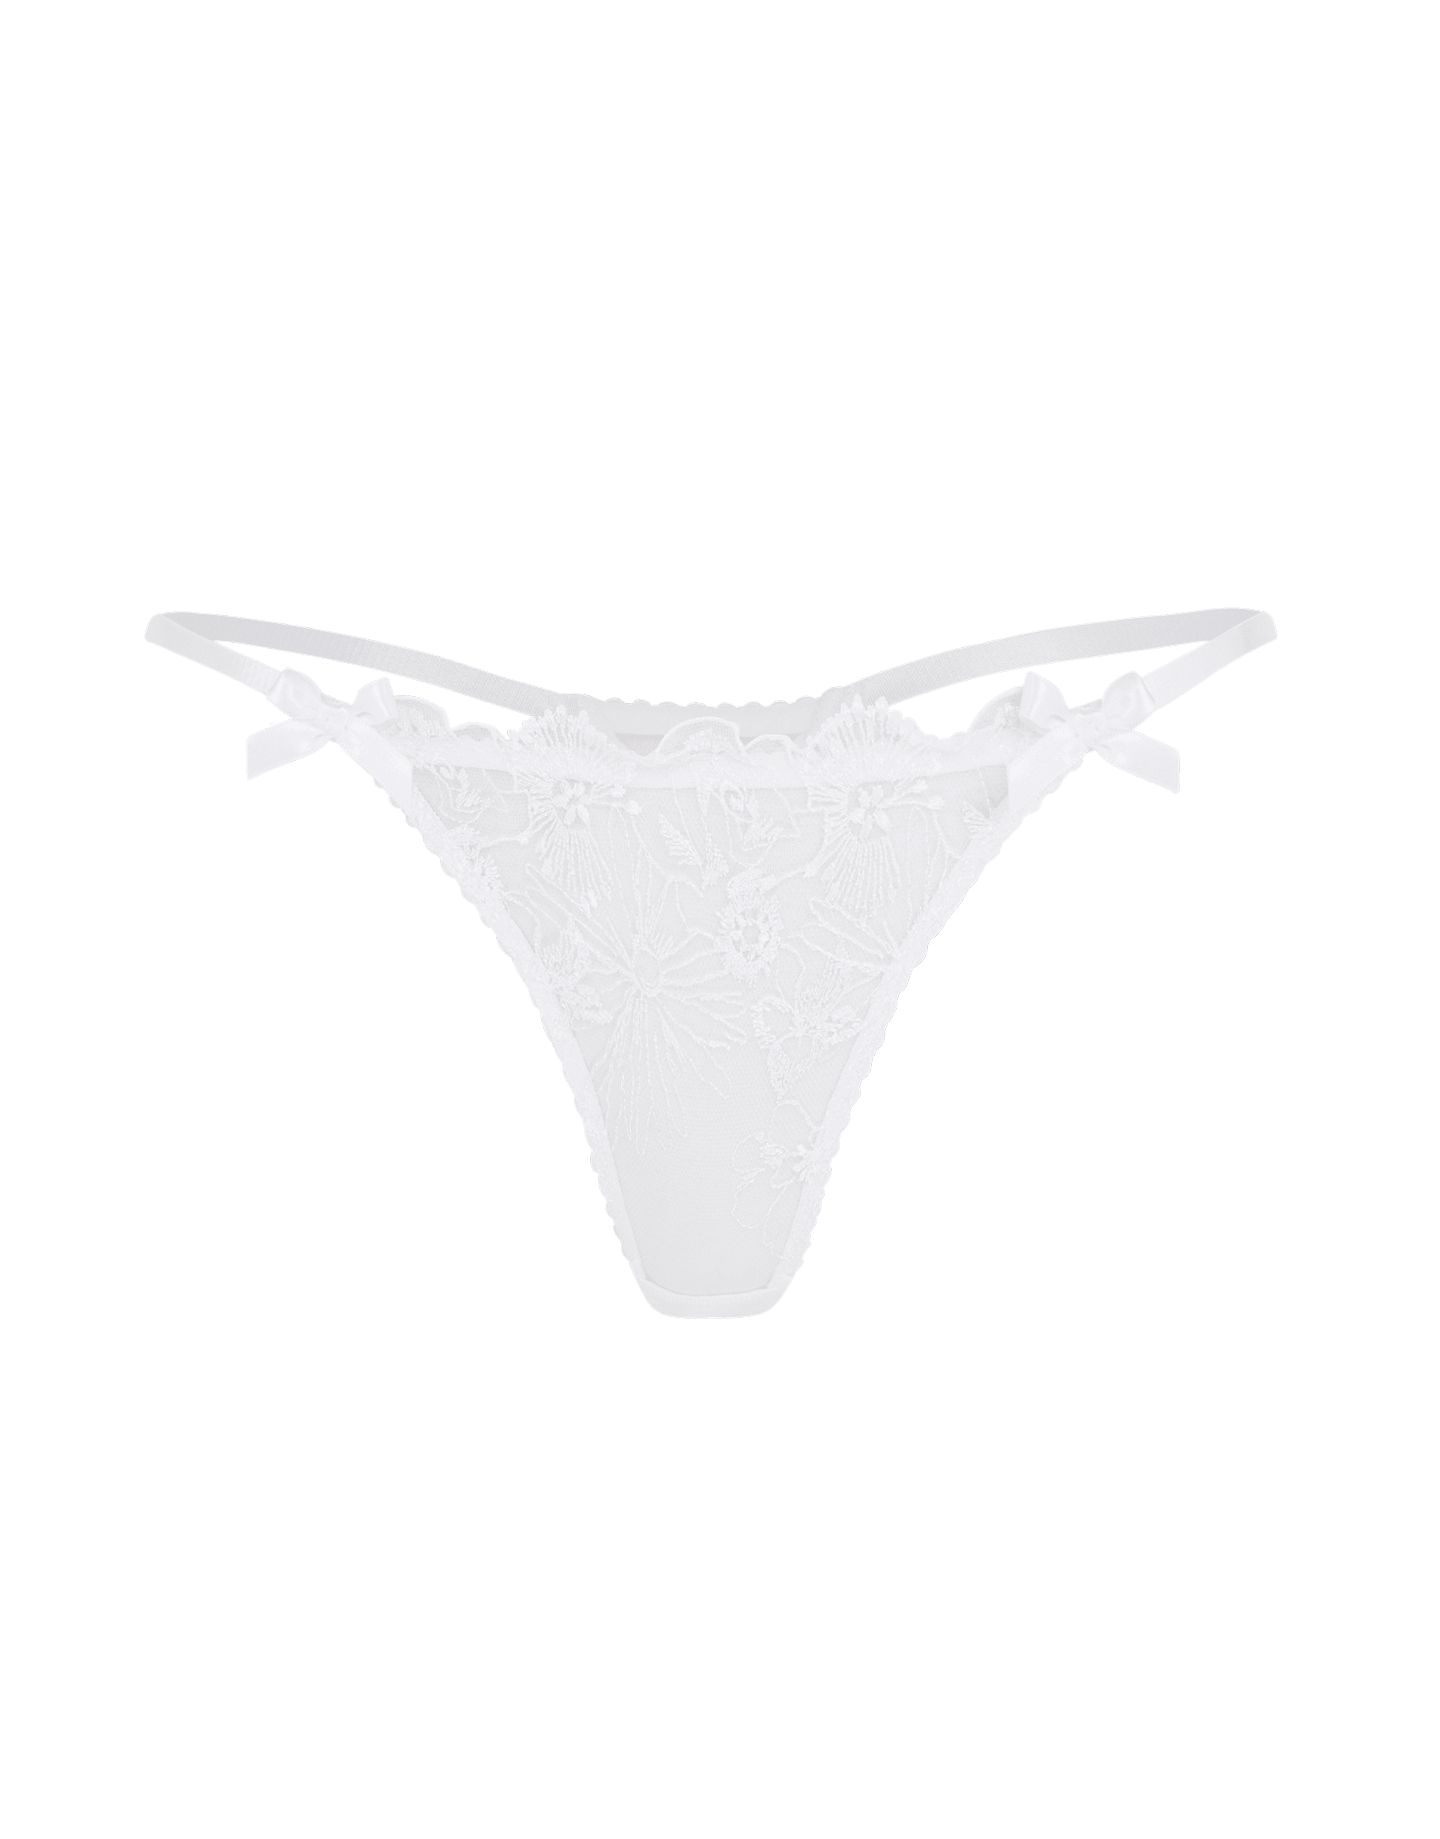 Jayce Thong in White | Agent Provocateur | Agent Provocateur (US)